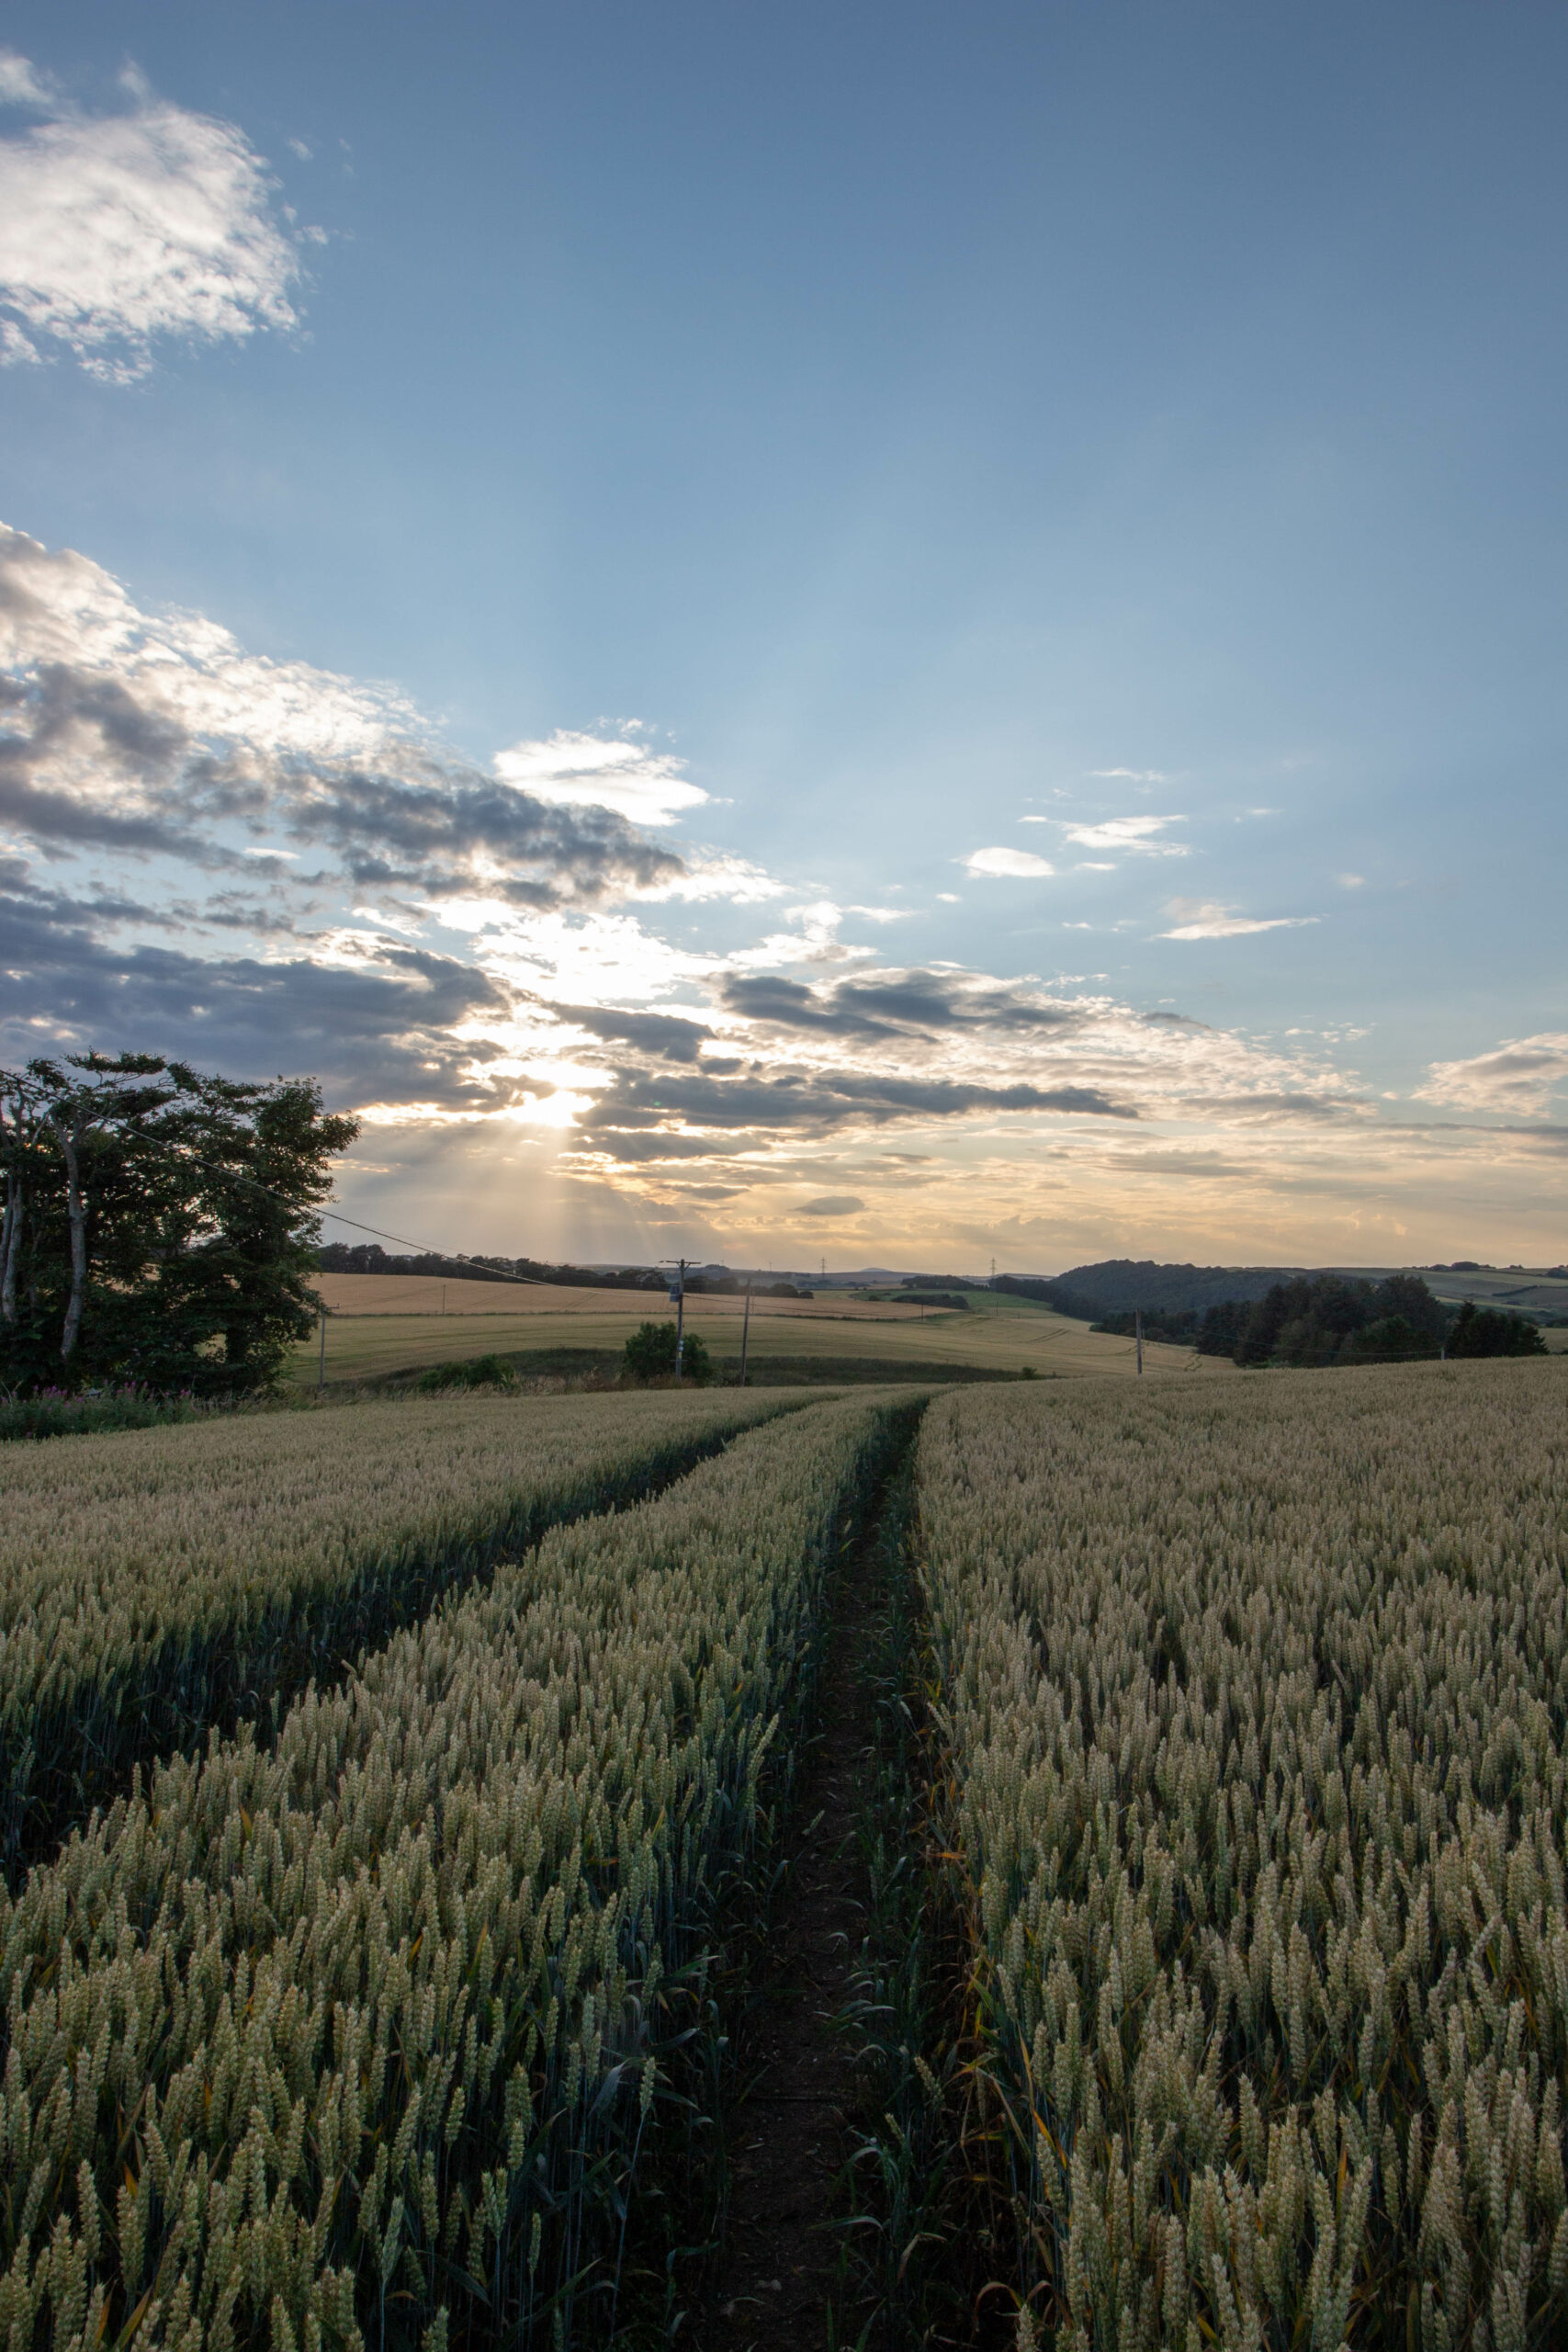 Sunset over wheat field and farm land